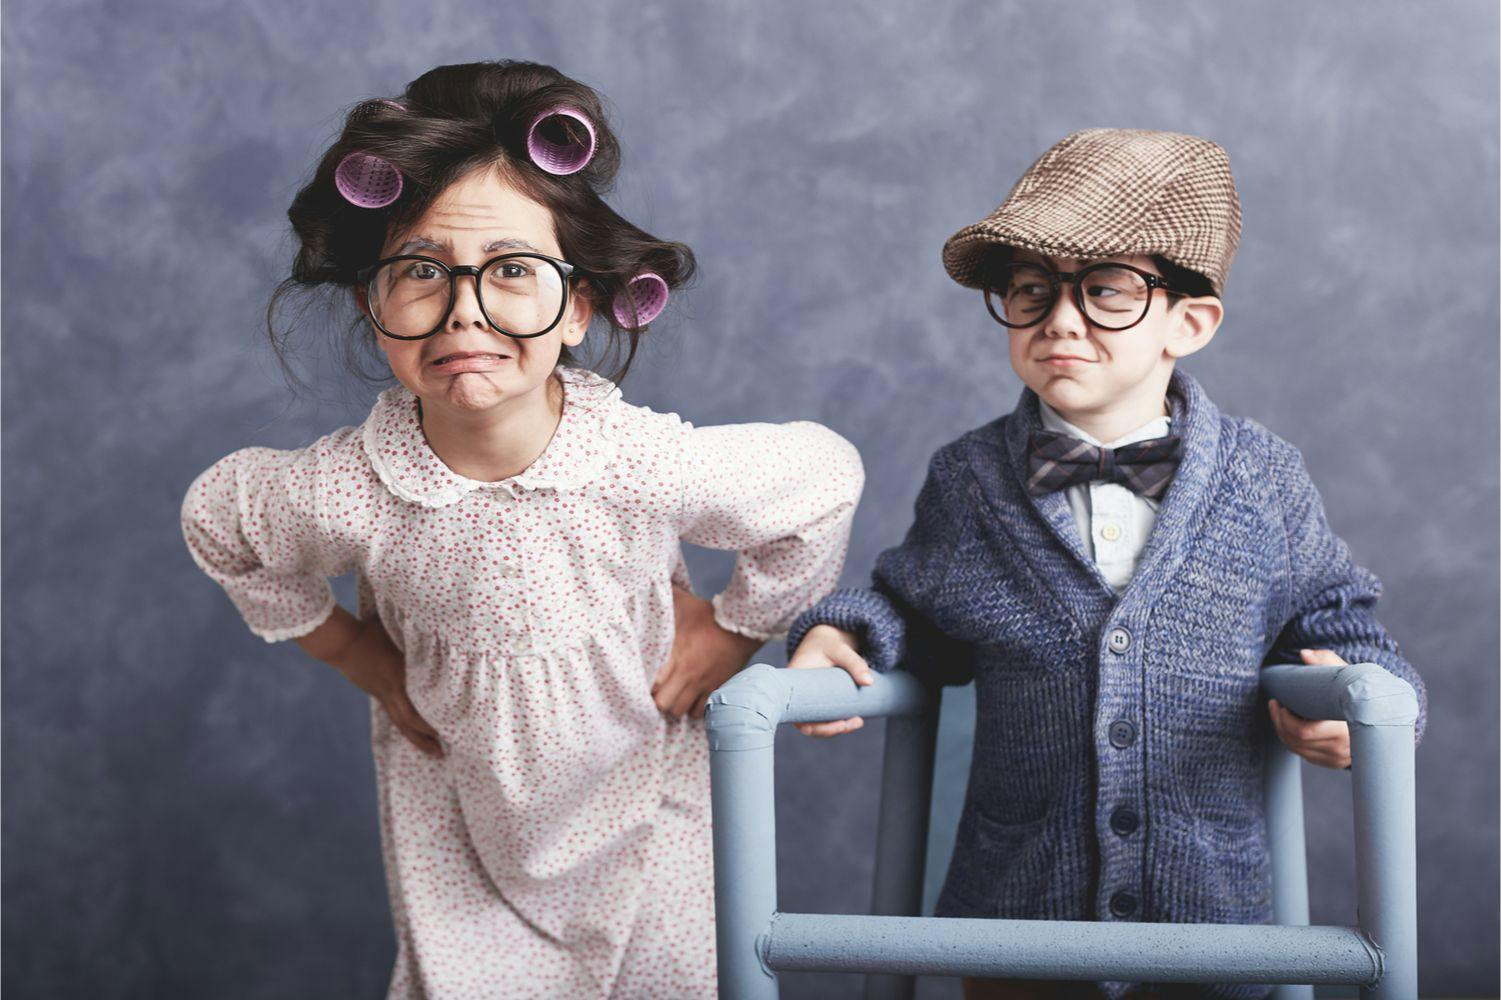 Children dressed as old people